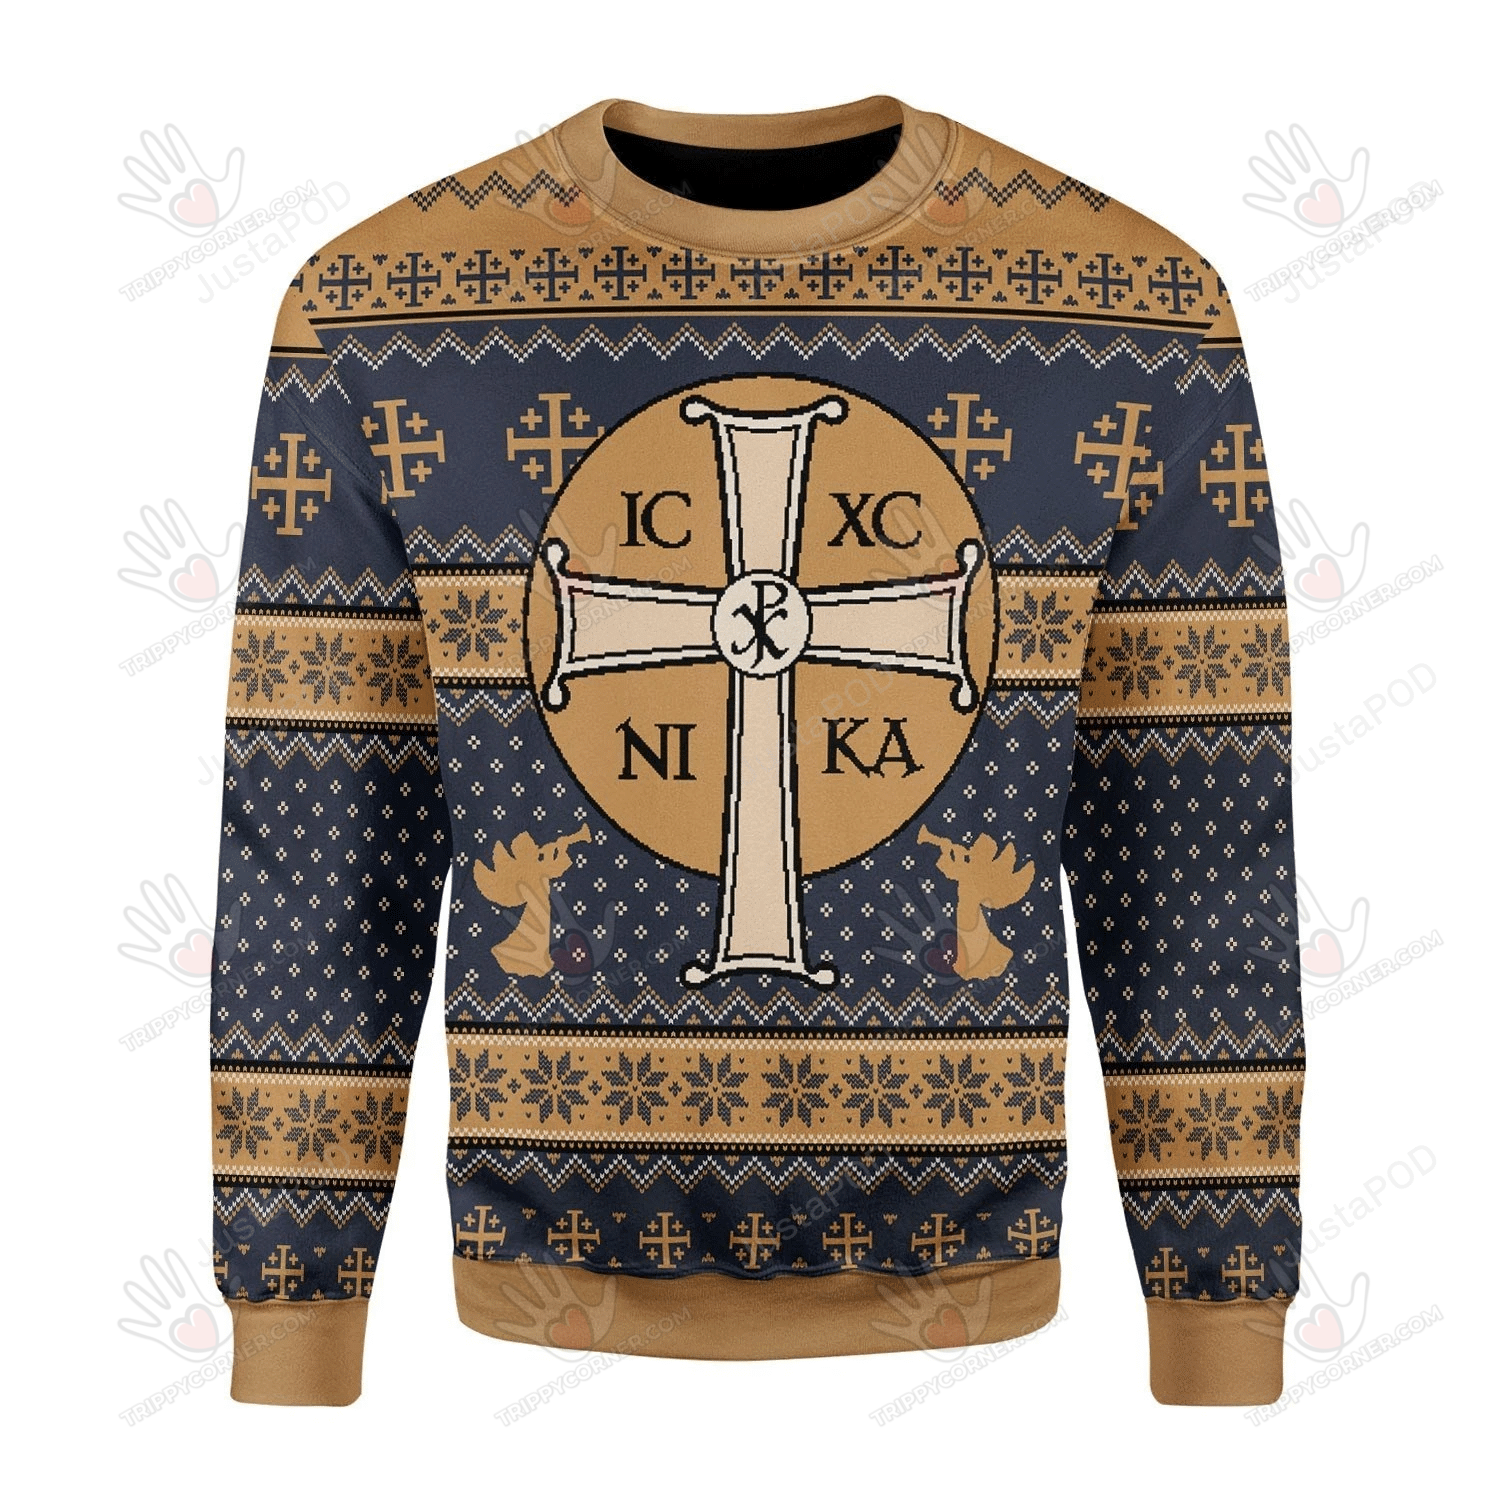 Jesus Ic Xc Ugly Christmas Sweater, All Over Print Sweatshirt, Ugly Sweater Christmas Gift